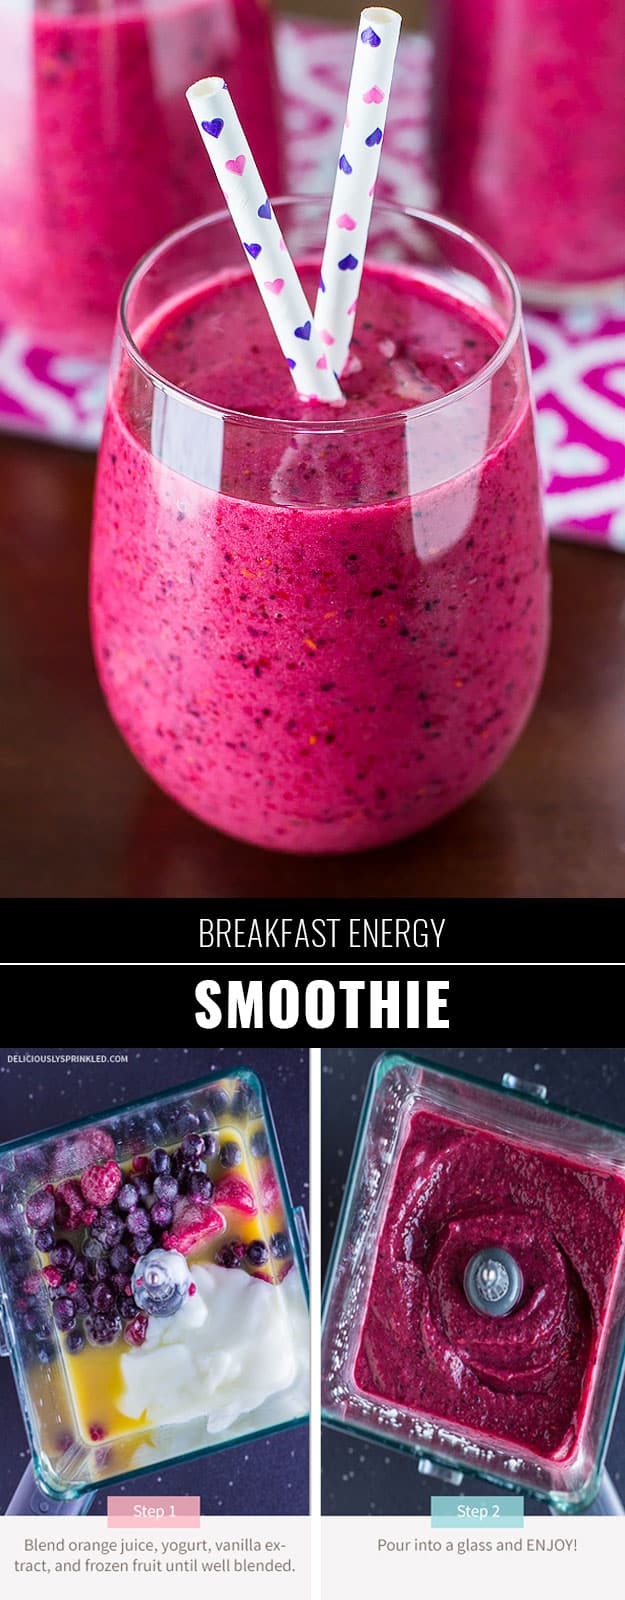 Healthy smoothie recipes and easy ideas perfect for breakfast, energy. Low calorie and high protein recipes for weightloss and to lose weight. Simple homemade recipe ideas that kids love. | Breakfast Energy Smoothie #smoothies #recipess